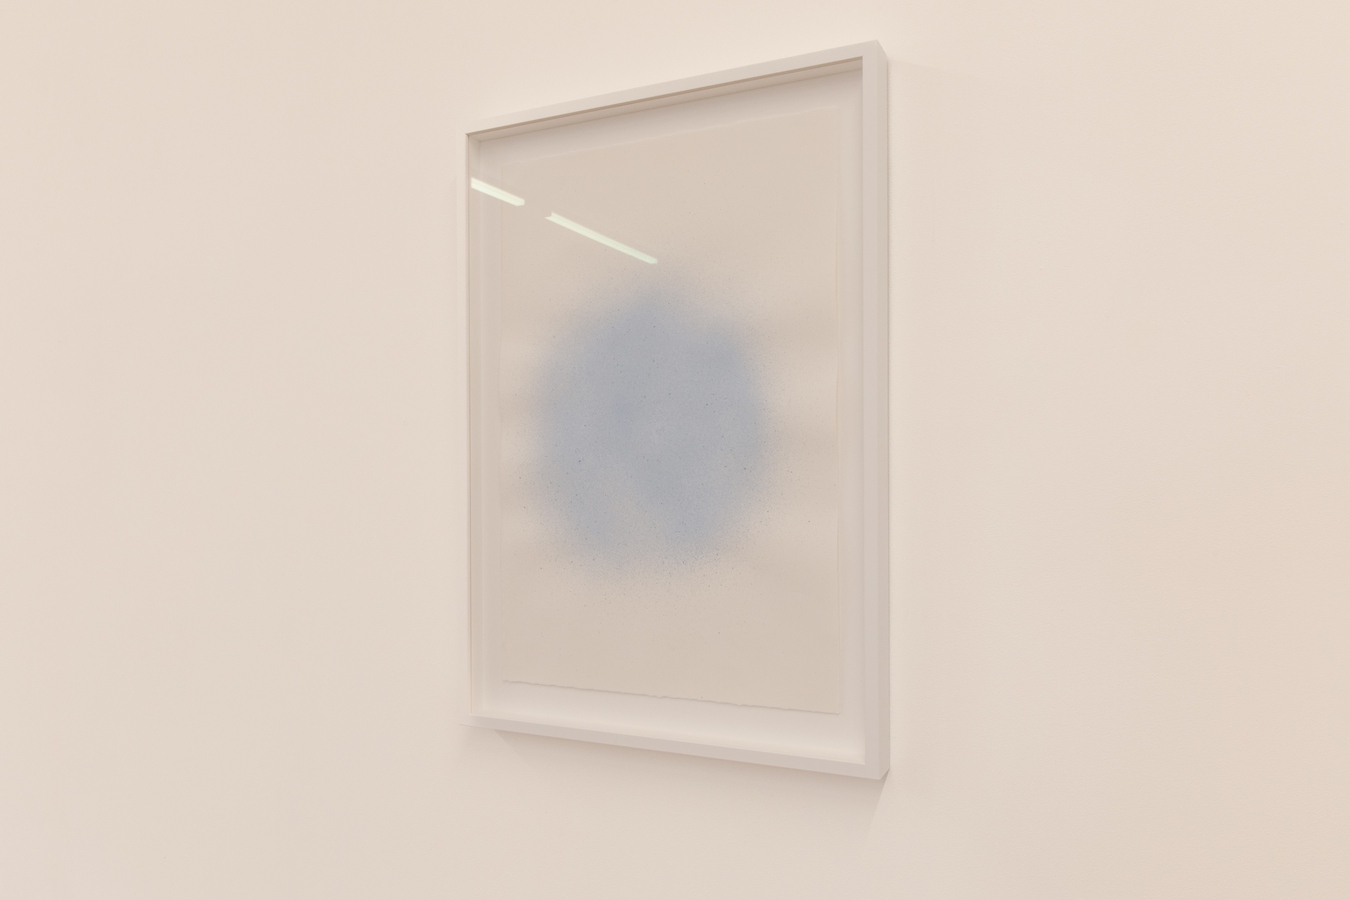 Image: D Harding, From the series Three Light Blue Breaths (installation view), 2022. Ultramarine blue, terra verde and pigment on 185gsm hot-pressed Arches Aquarelle paper. Private collection. Photo by Nancy Zhou.